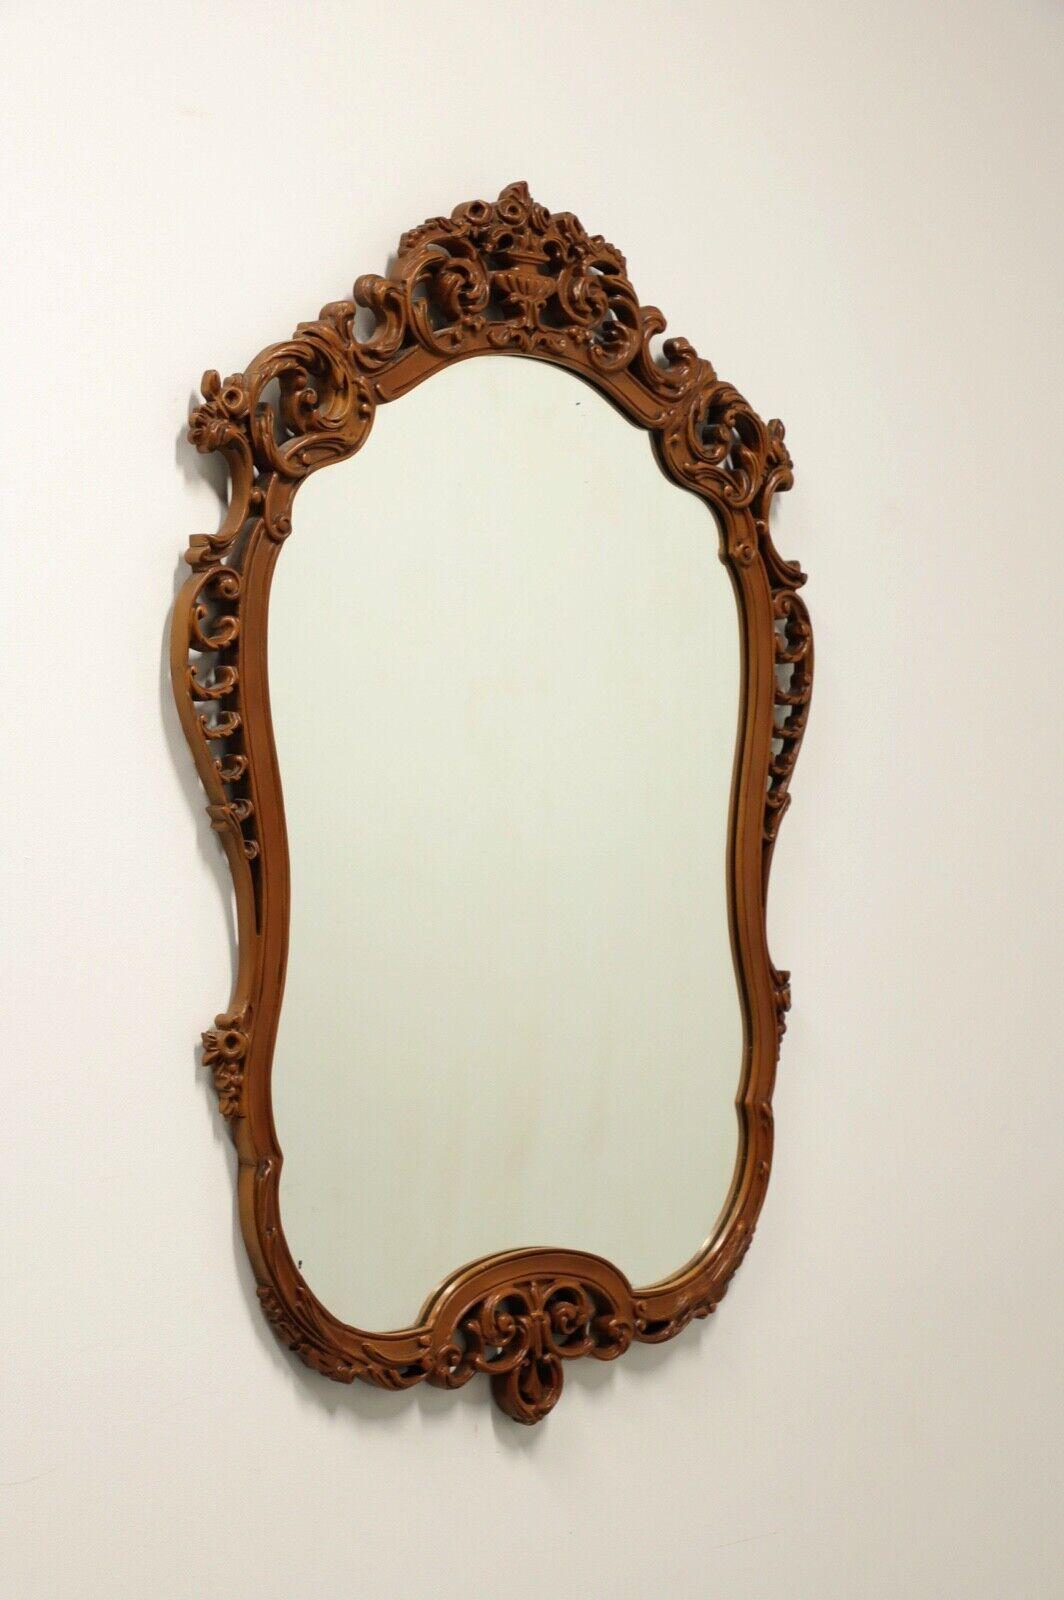 An antique French Country wall mirror, unbranded. Mirror glass in an intricately carved mahogany frame with a wire hanger. Made in the USA, in the early 20th century.

Measures: 32.5w 1.25d 48h, Weighs Approximately: 30 lbs

Very good antique